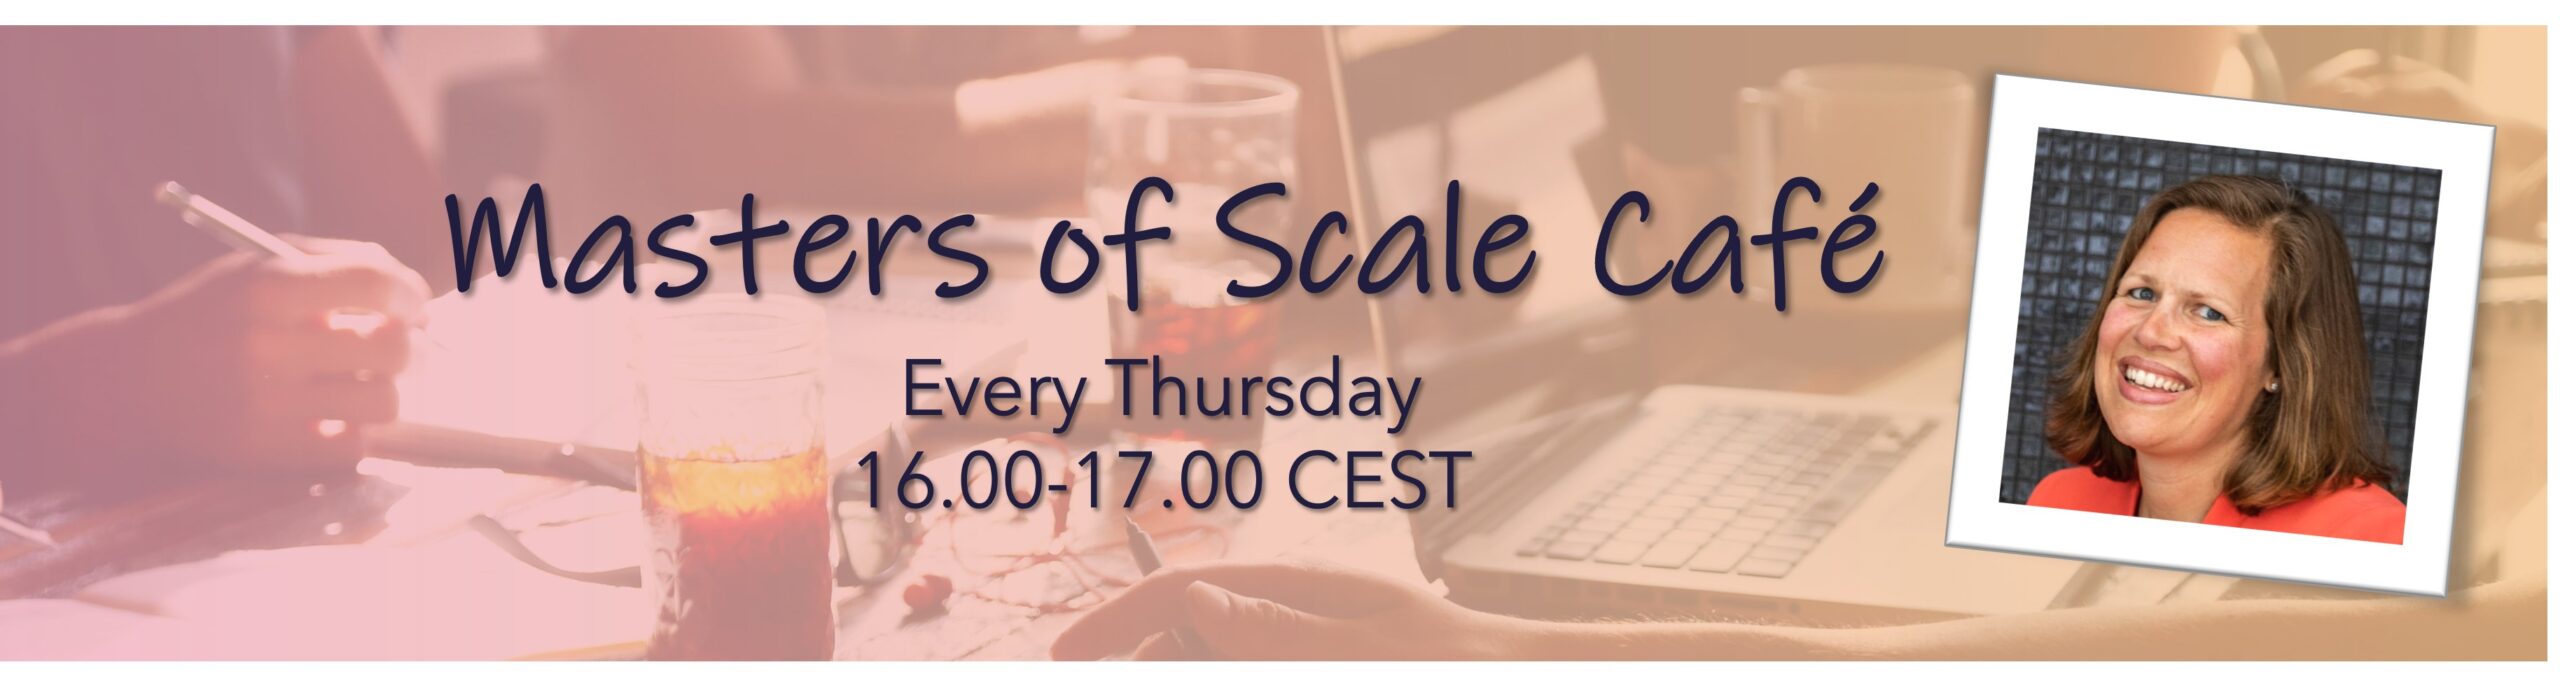 Masters of Scale Café with Pieter Jan Doets